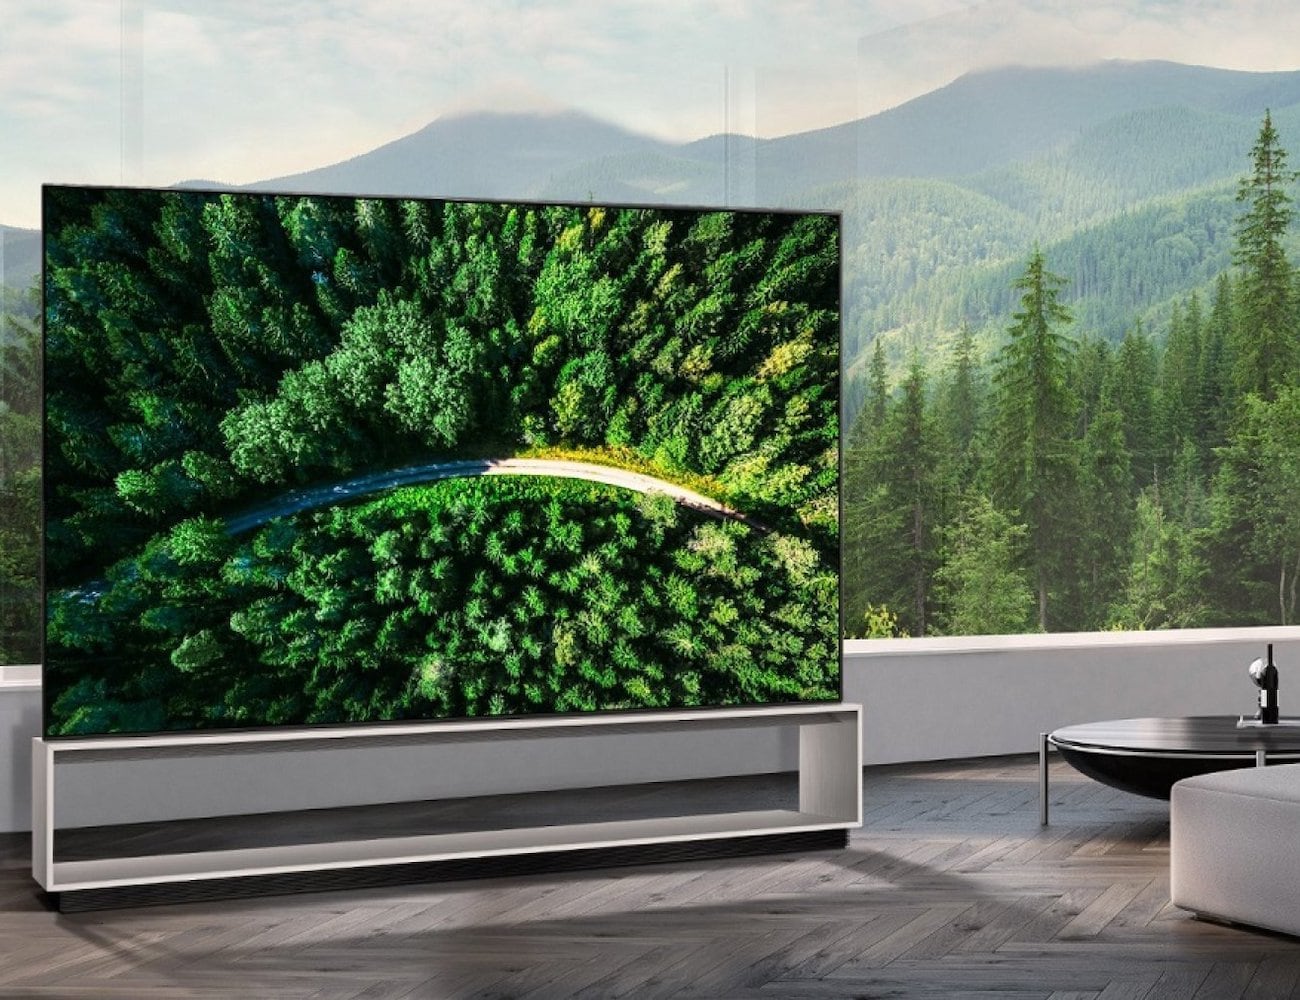 LG Z9 8K Smart OLED TV gives you 88 inches of incredible resolution